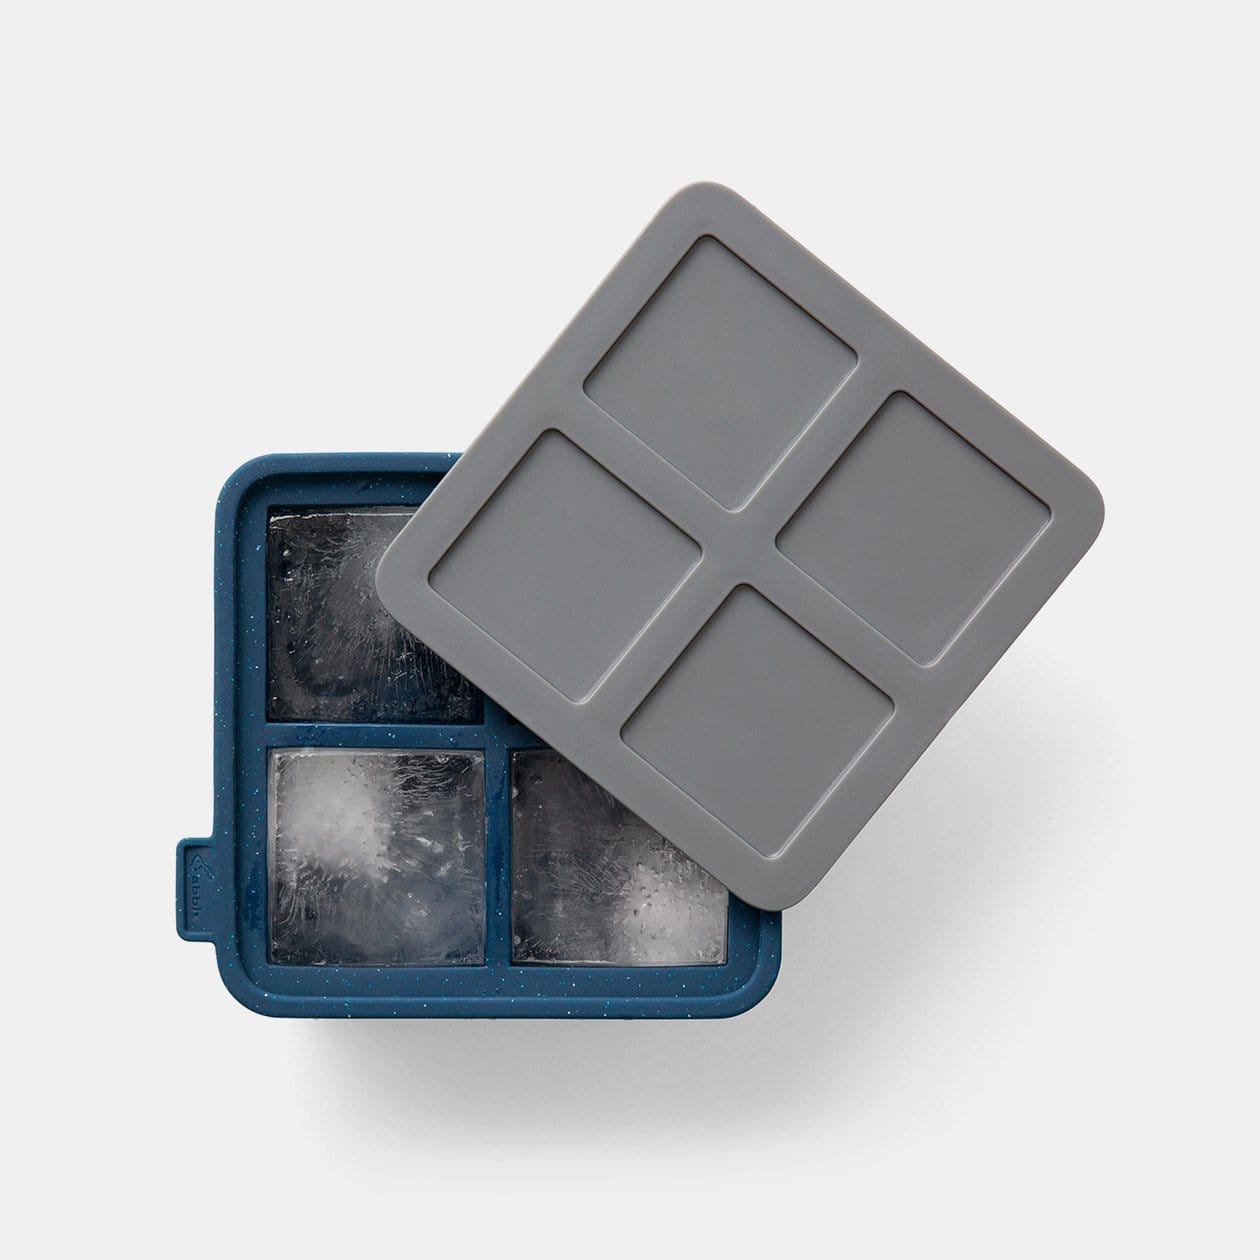 King Cube 2-inch Silicone Ice Cube Tray